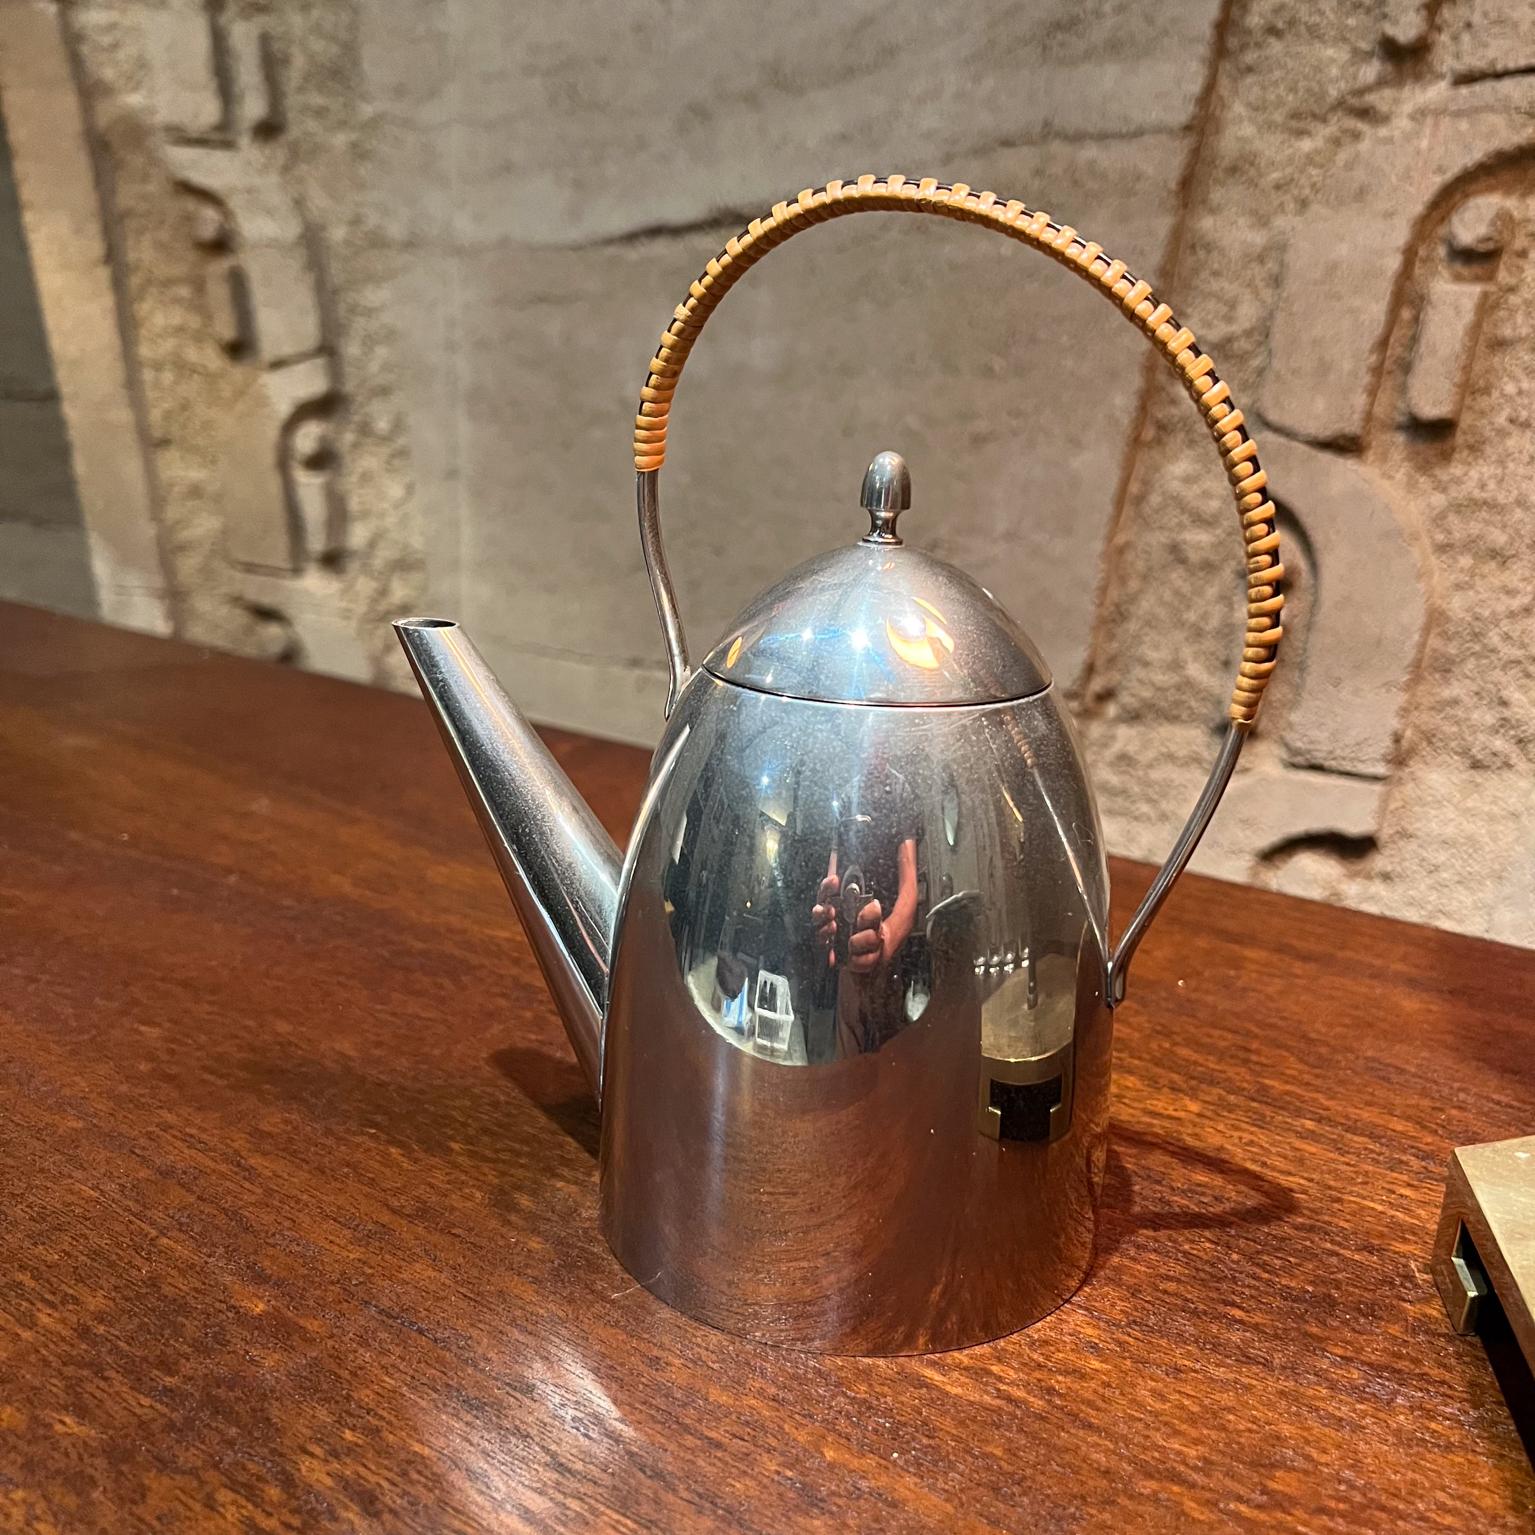 D & S Personal Tea Kettle Pot Stainless Steel. 
Bauhaus clean Modern Design style of Peter Behrens
Handle with cane wrap
Very clean vintage gently used condition.  
Stamped at the bottom. 
See all images shown.